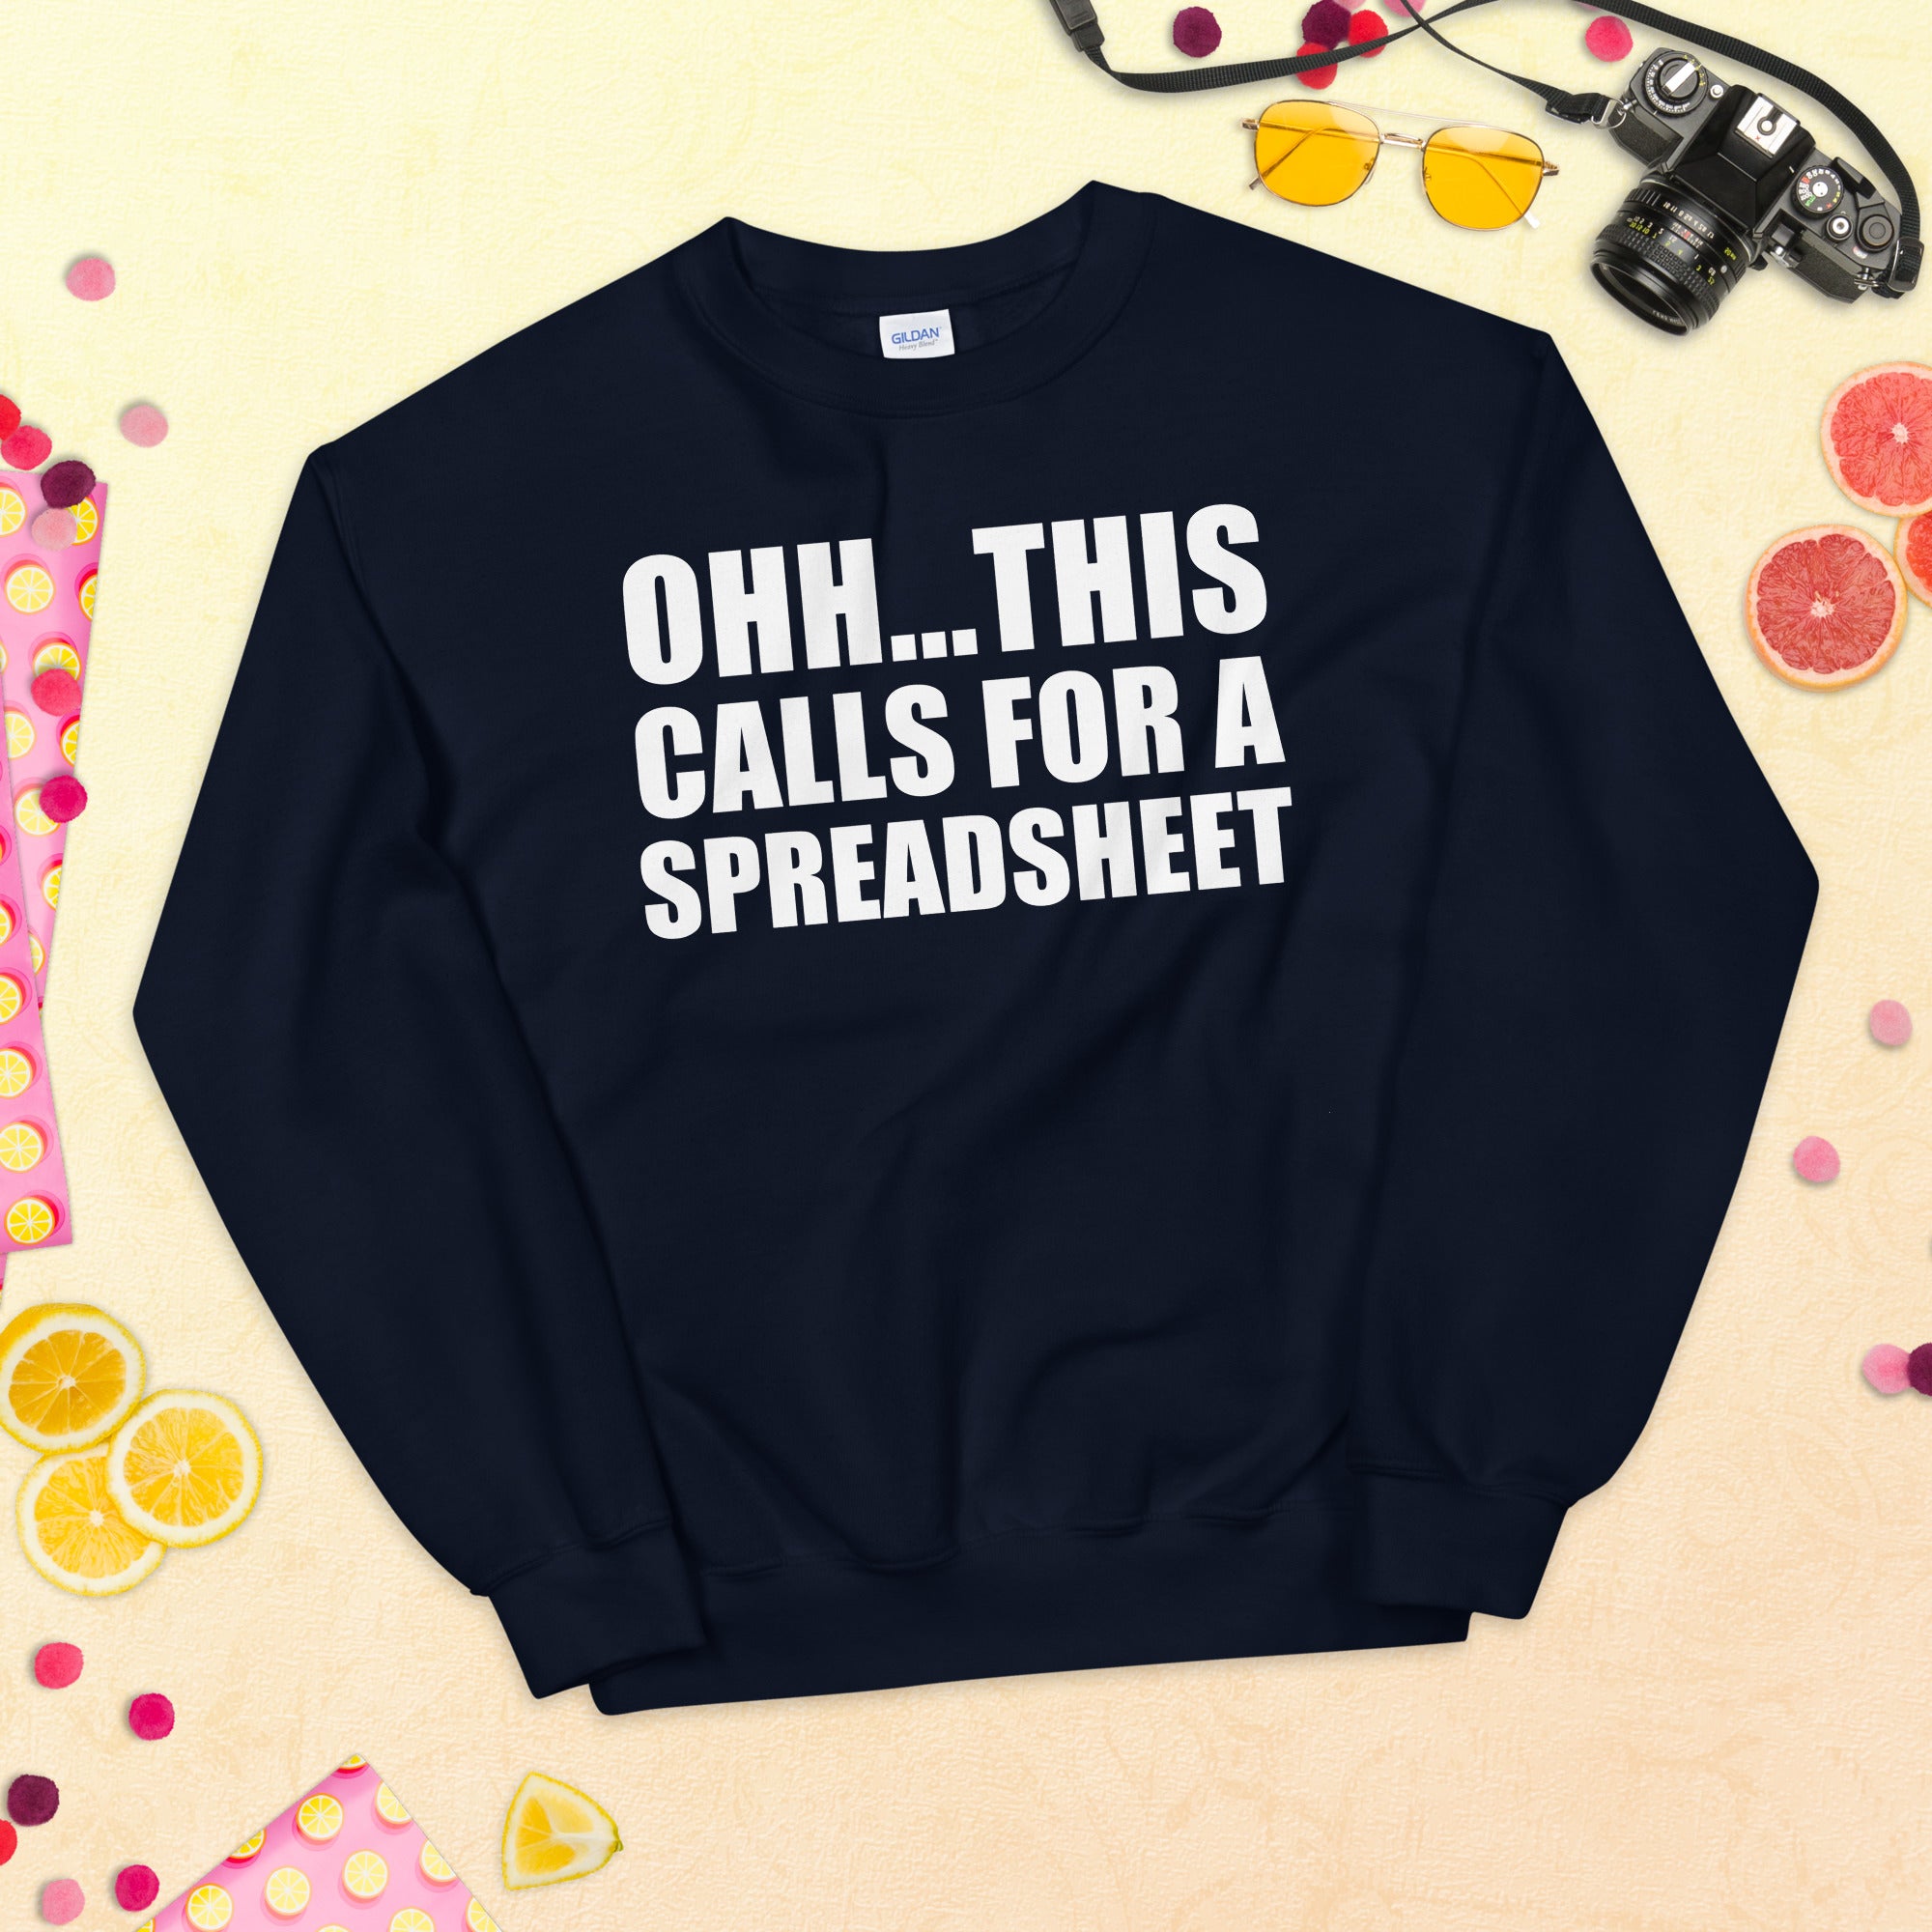 Ohh this calls for a Spreadsheet, CPA Gift, Tax Prep Sweater, Accountant Sweatshirt, New cpa shirt, CPA assistant shirt, Funny accountant